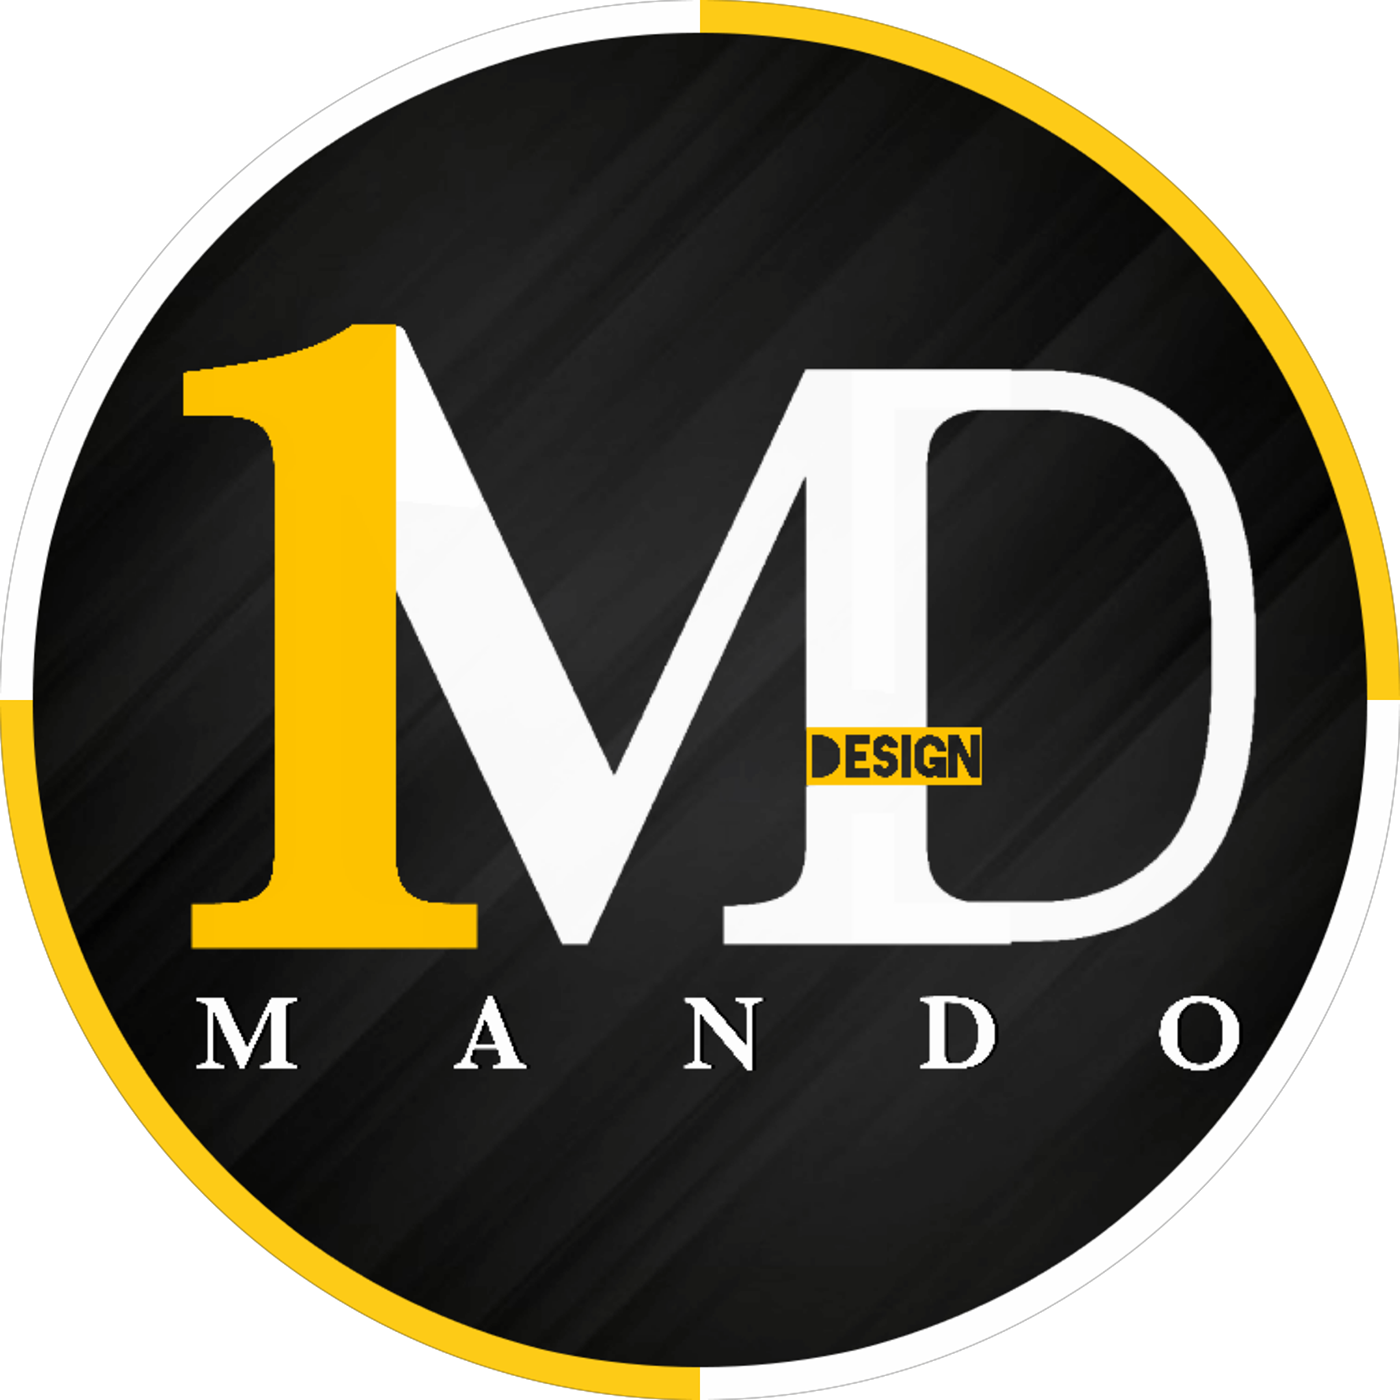 1md